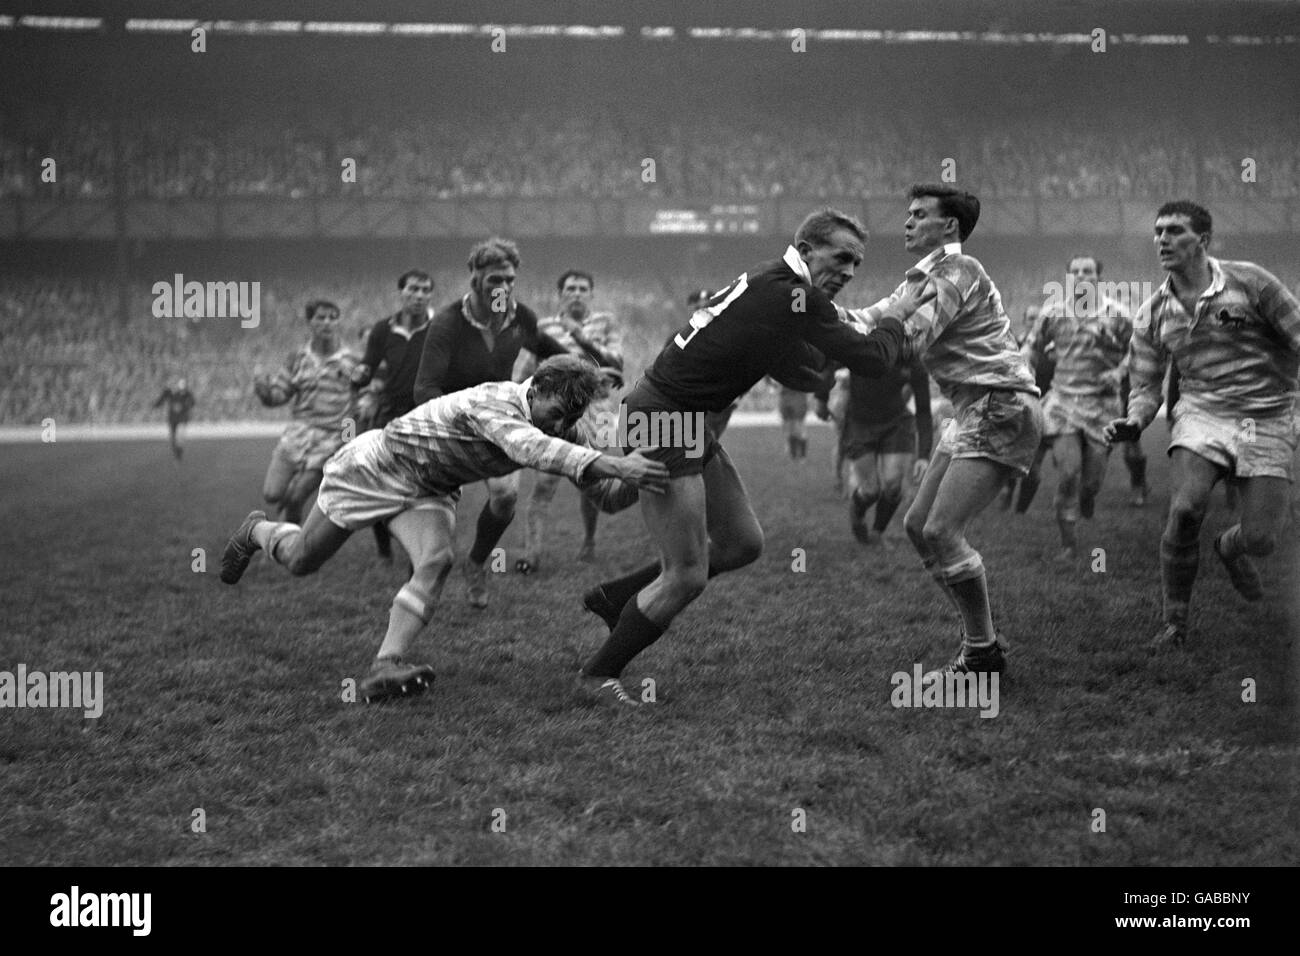 Rugby Union - Oxford University v Cambridge University - Twickenham. Peter Dawkins, the American at Oxford, is tackled by J.C Brash (left) and W.M Bussey of Cambridge (right). Stock Photo